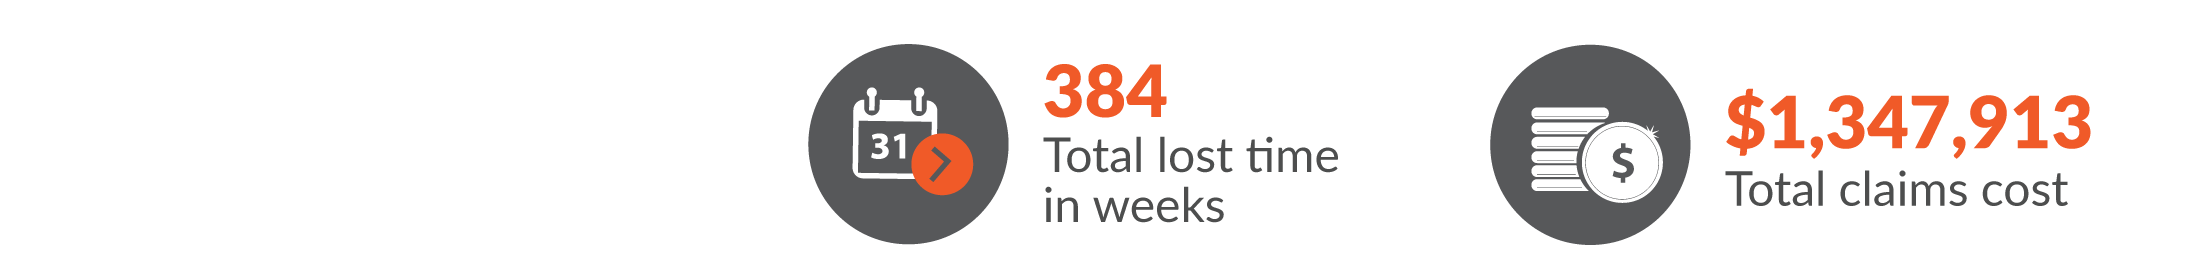 This infographic shows total workers compensation claims for Accommodation, Cafes and Restaurants resulted in 384 total lost time in weeks and $1,347,913 was paid in benefits.